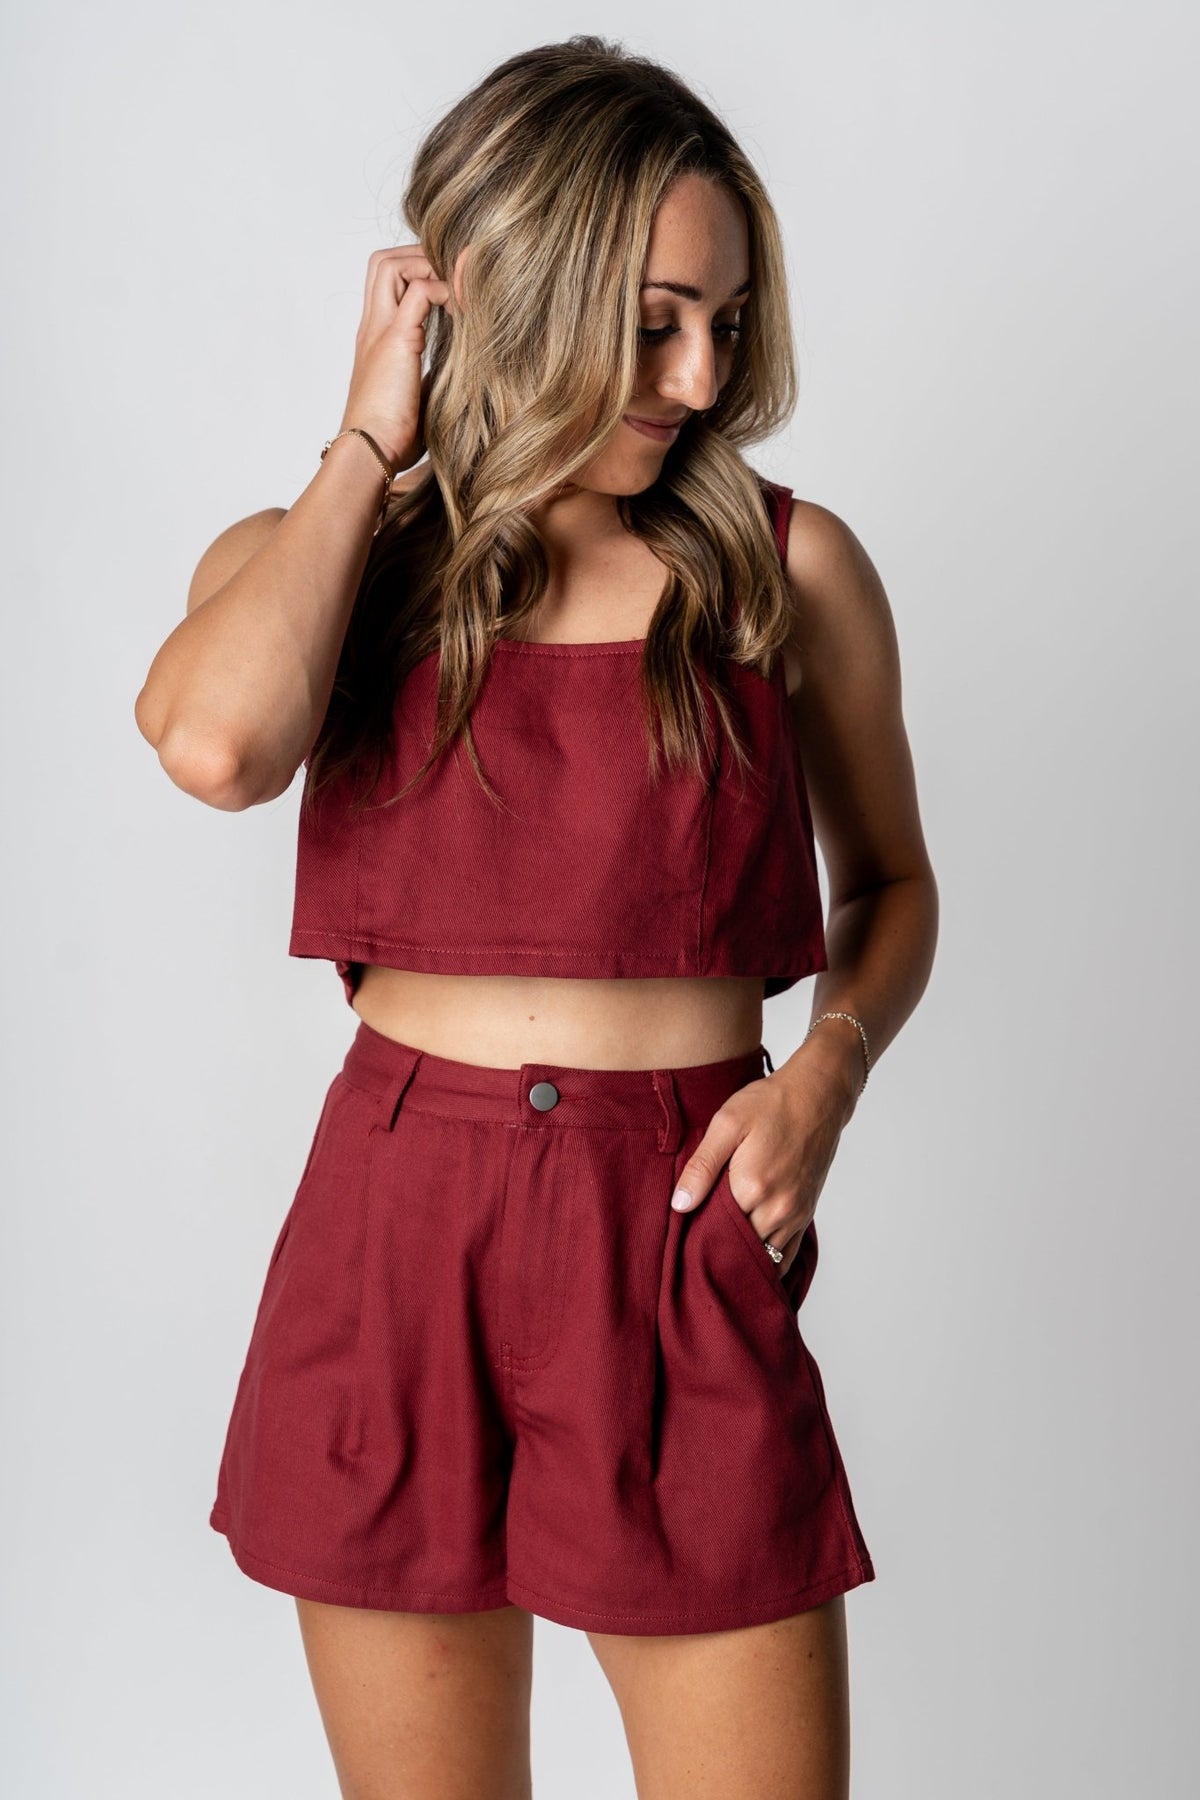 Tie back crop tank top burgundy - Cute crop top - Trendy Tank Tops at Lush Fashion Lounge Boutique in Oklahoma City